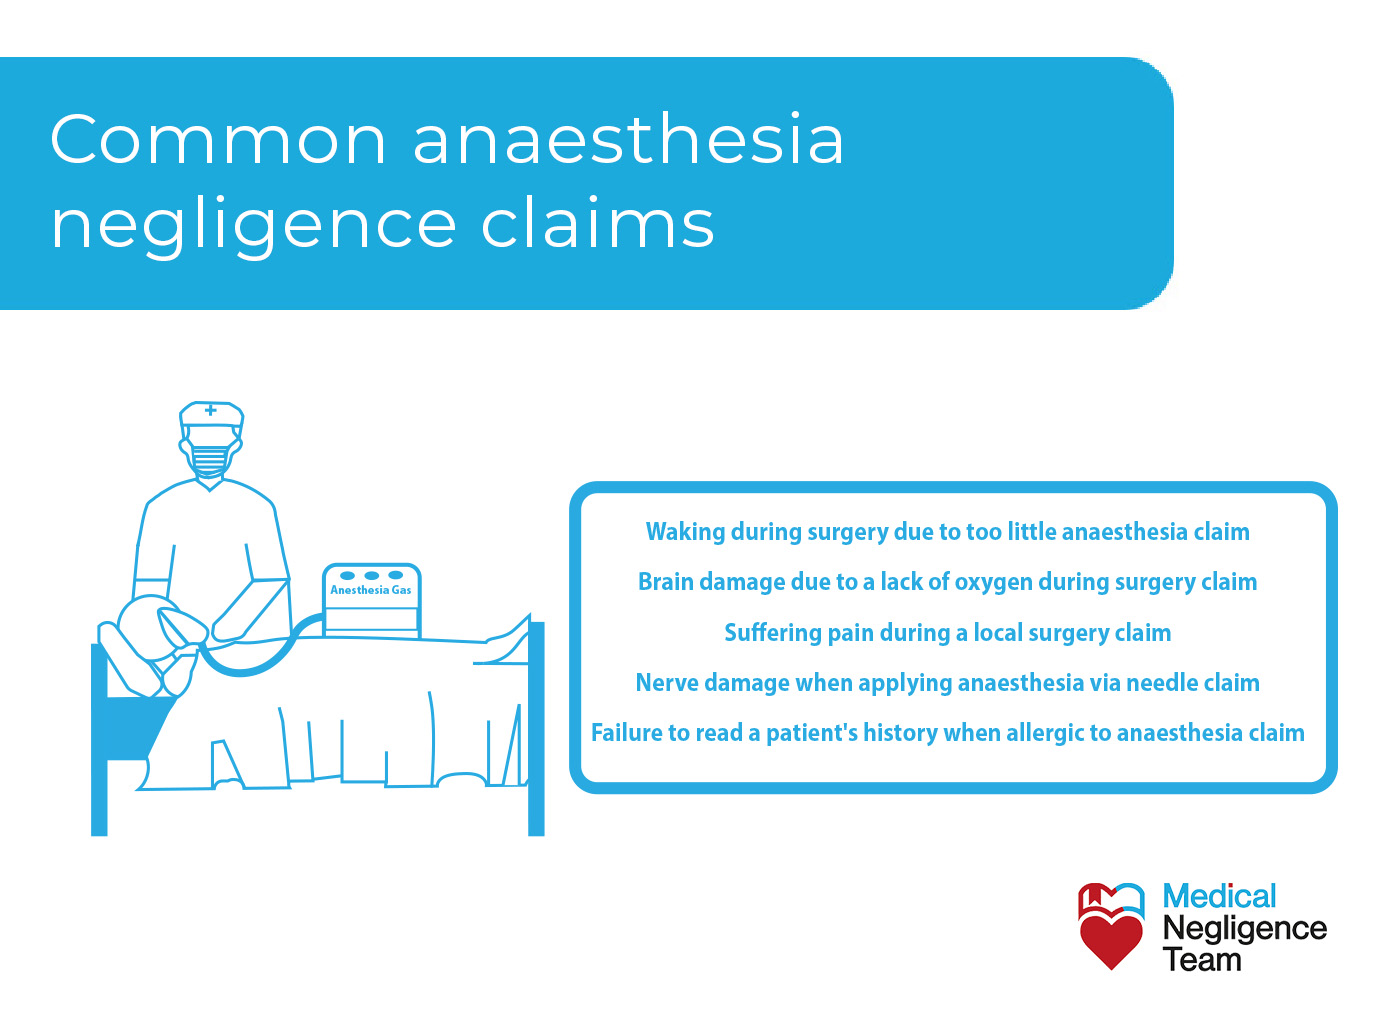 Common claims for anaesthesia negligence